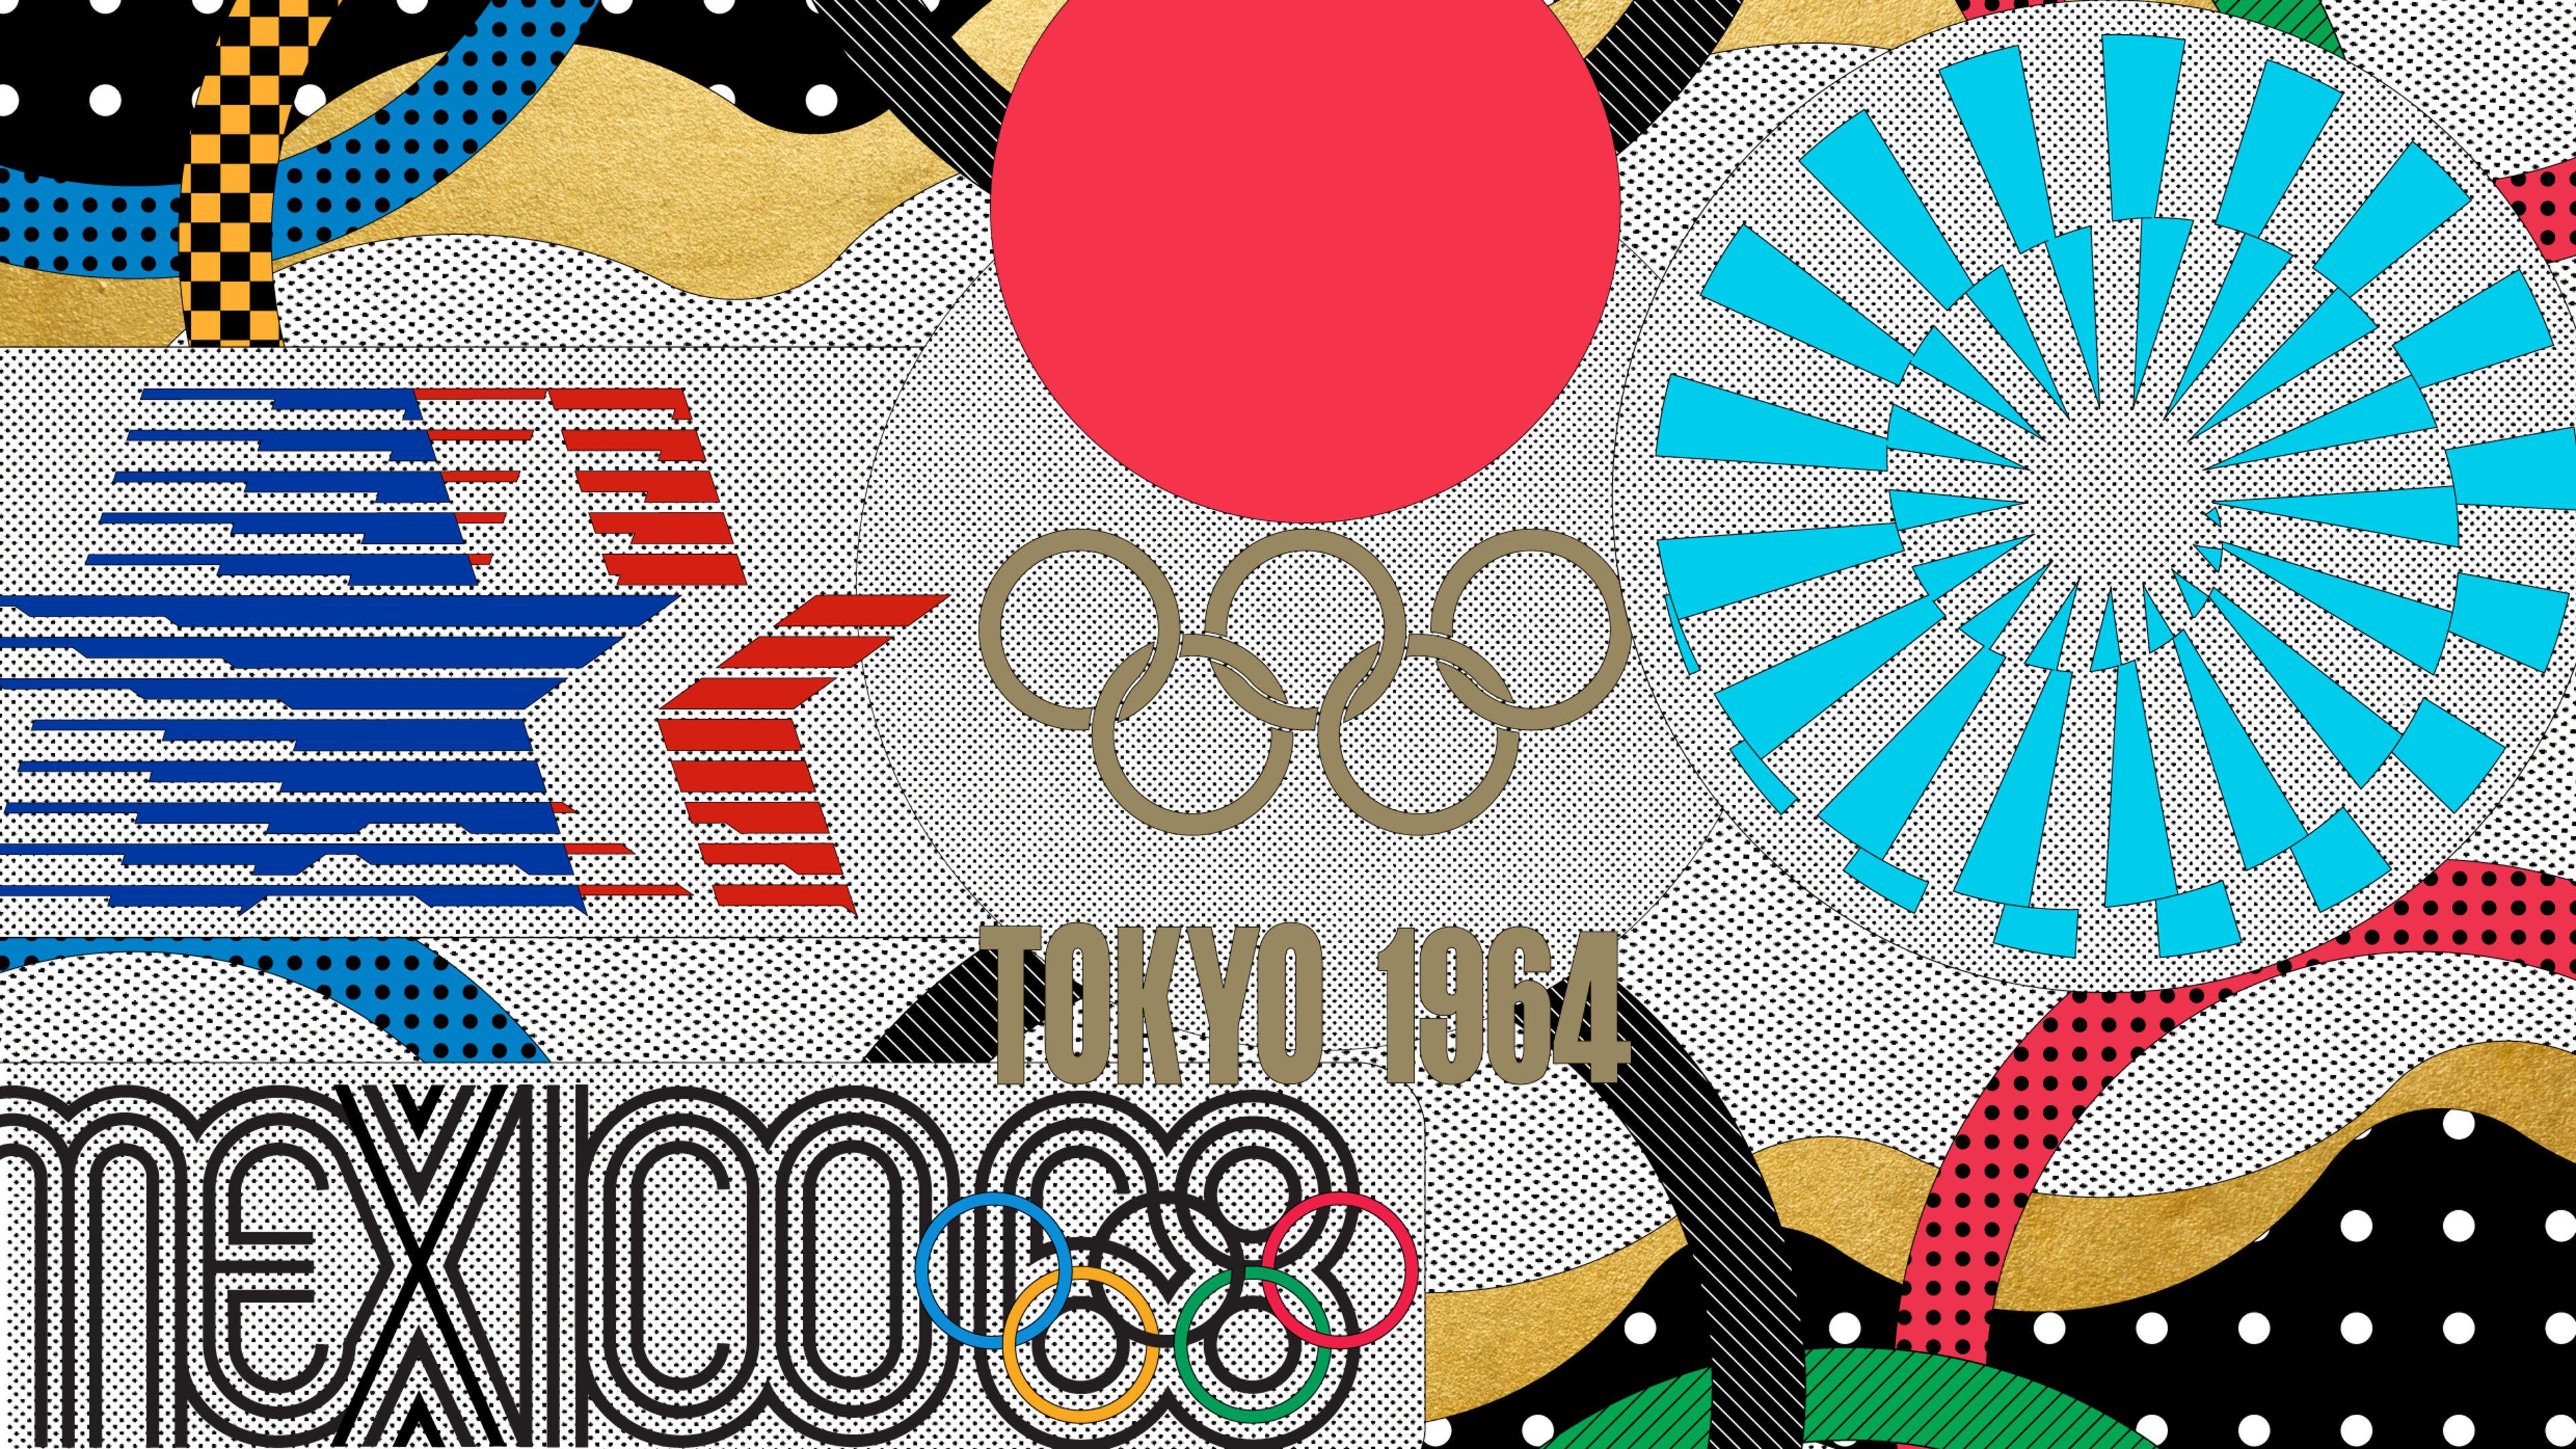 The best Olympic logos of all time, according to design experts